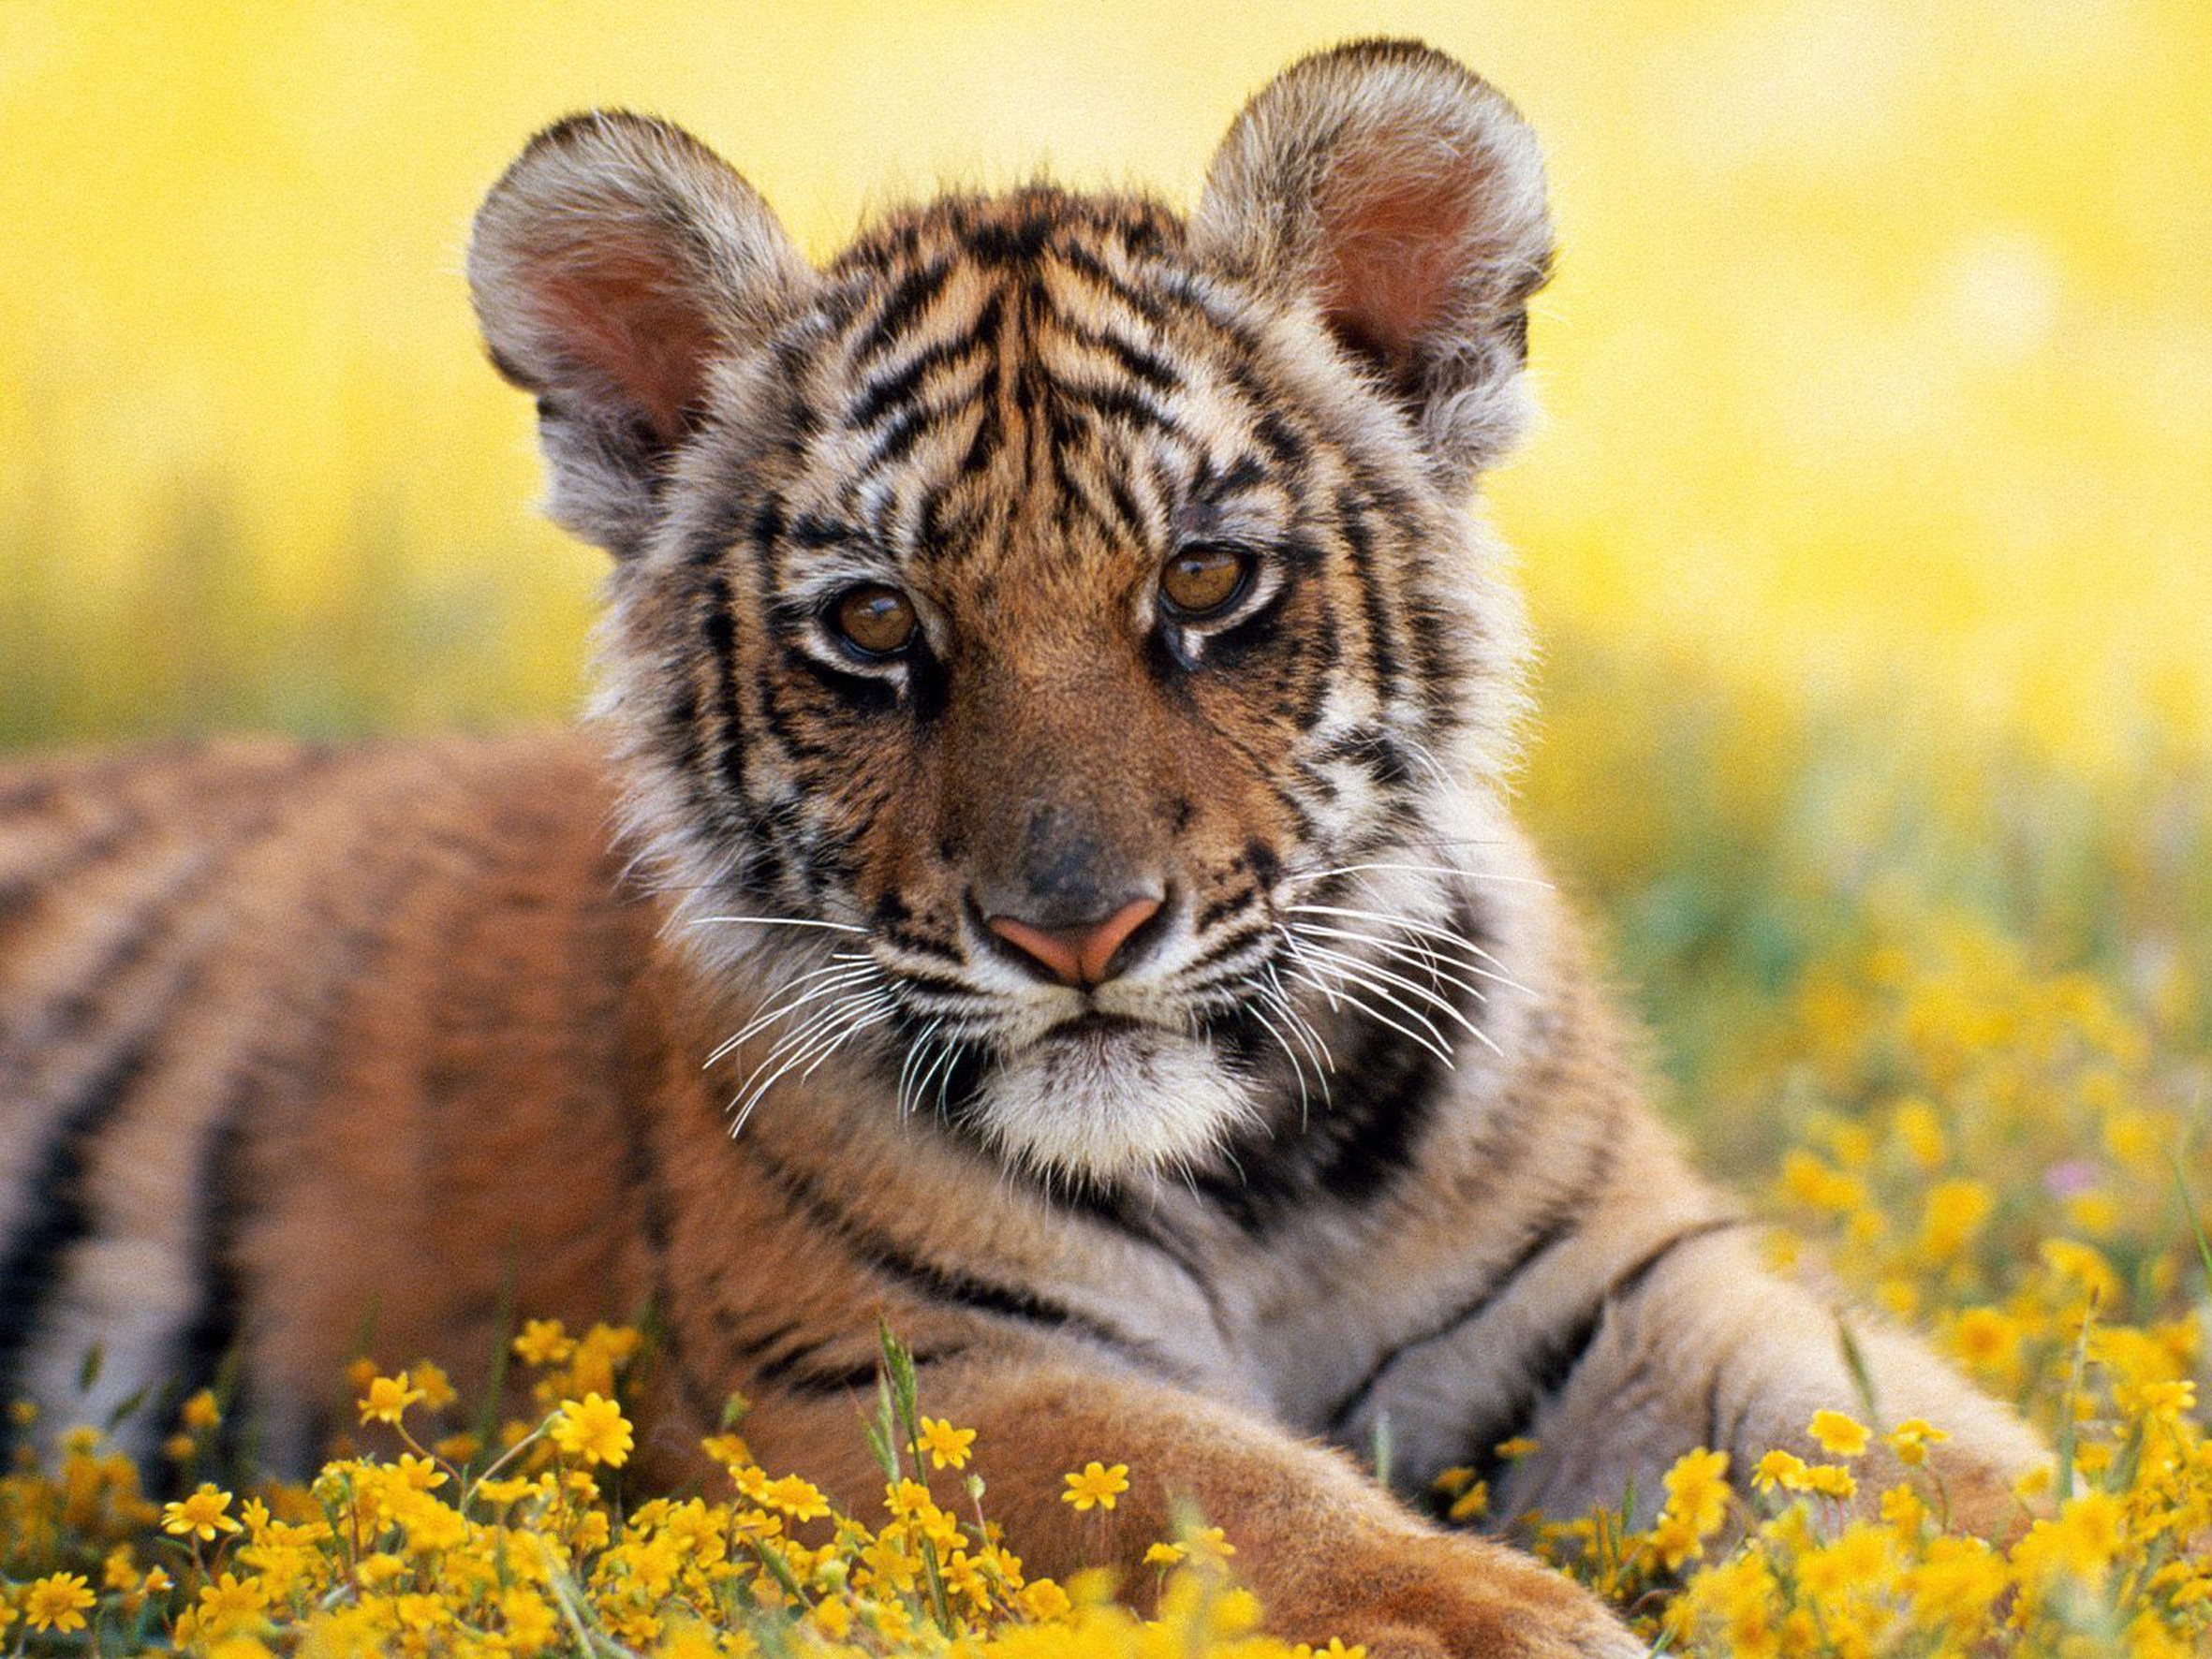 animals, flowers, grass, young, tiger, joey, tiger cub